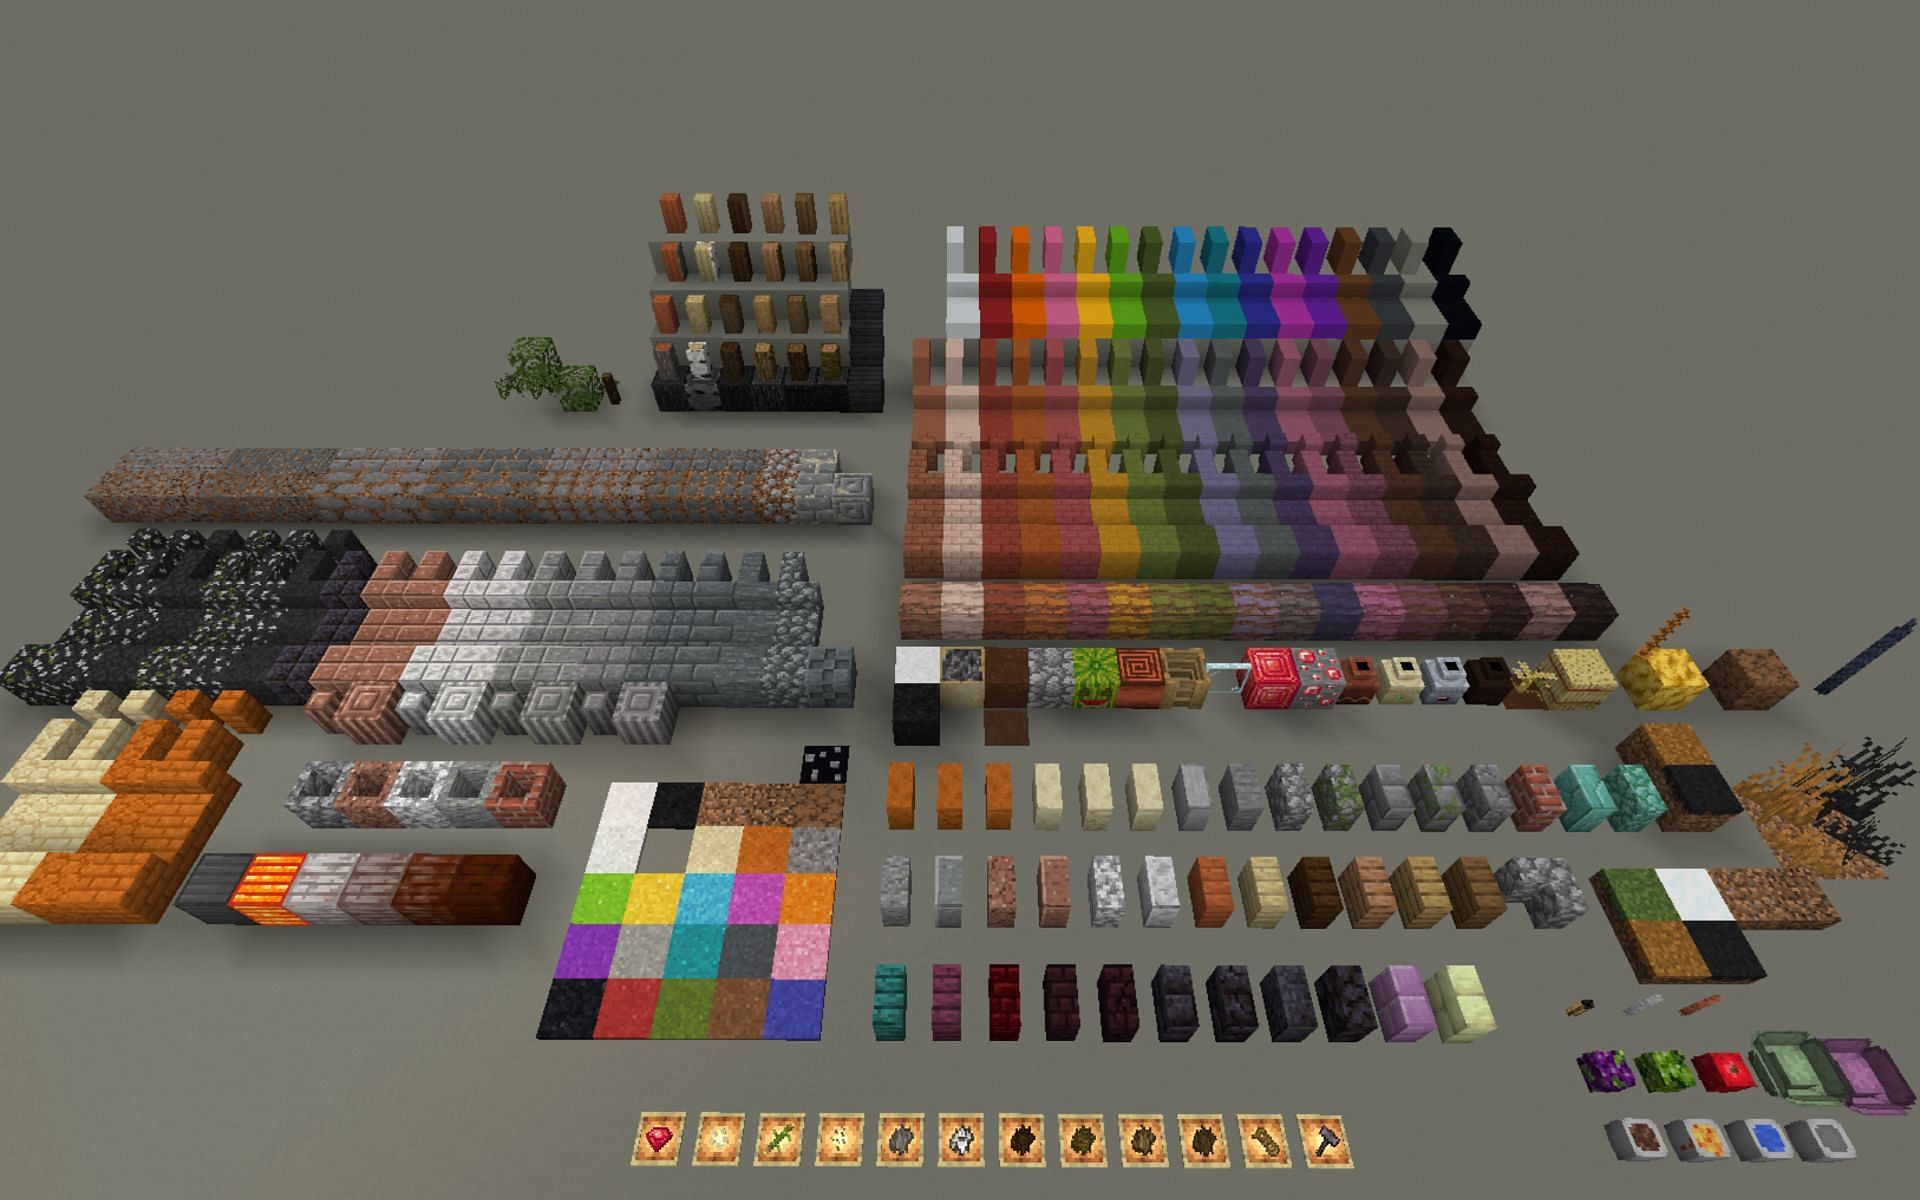 Mods cna be used to add several new items to Minecraft (Image via Curseforge/tjvanprooyen)